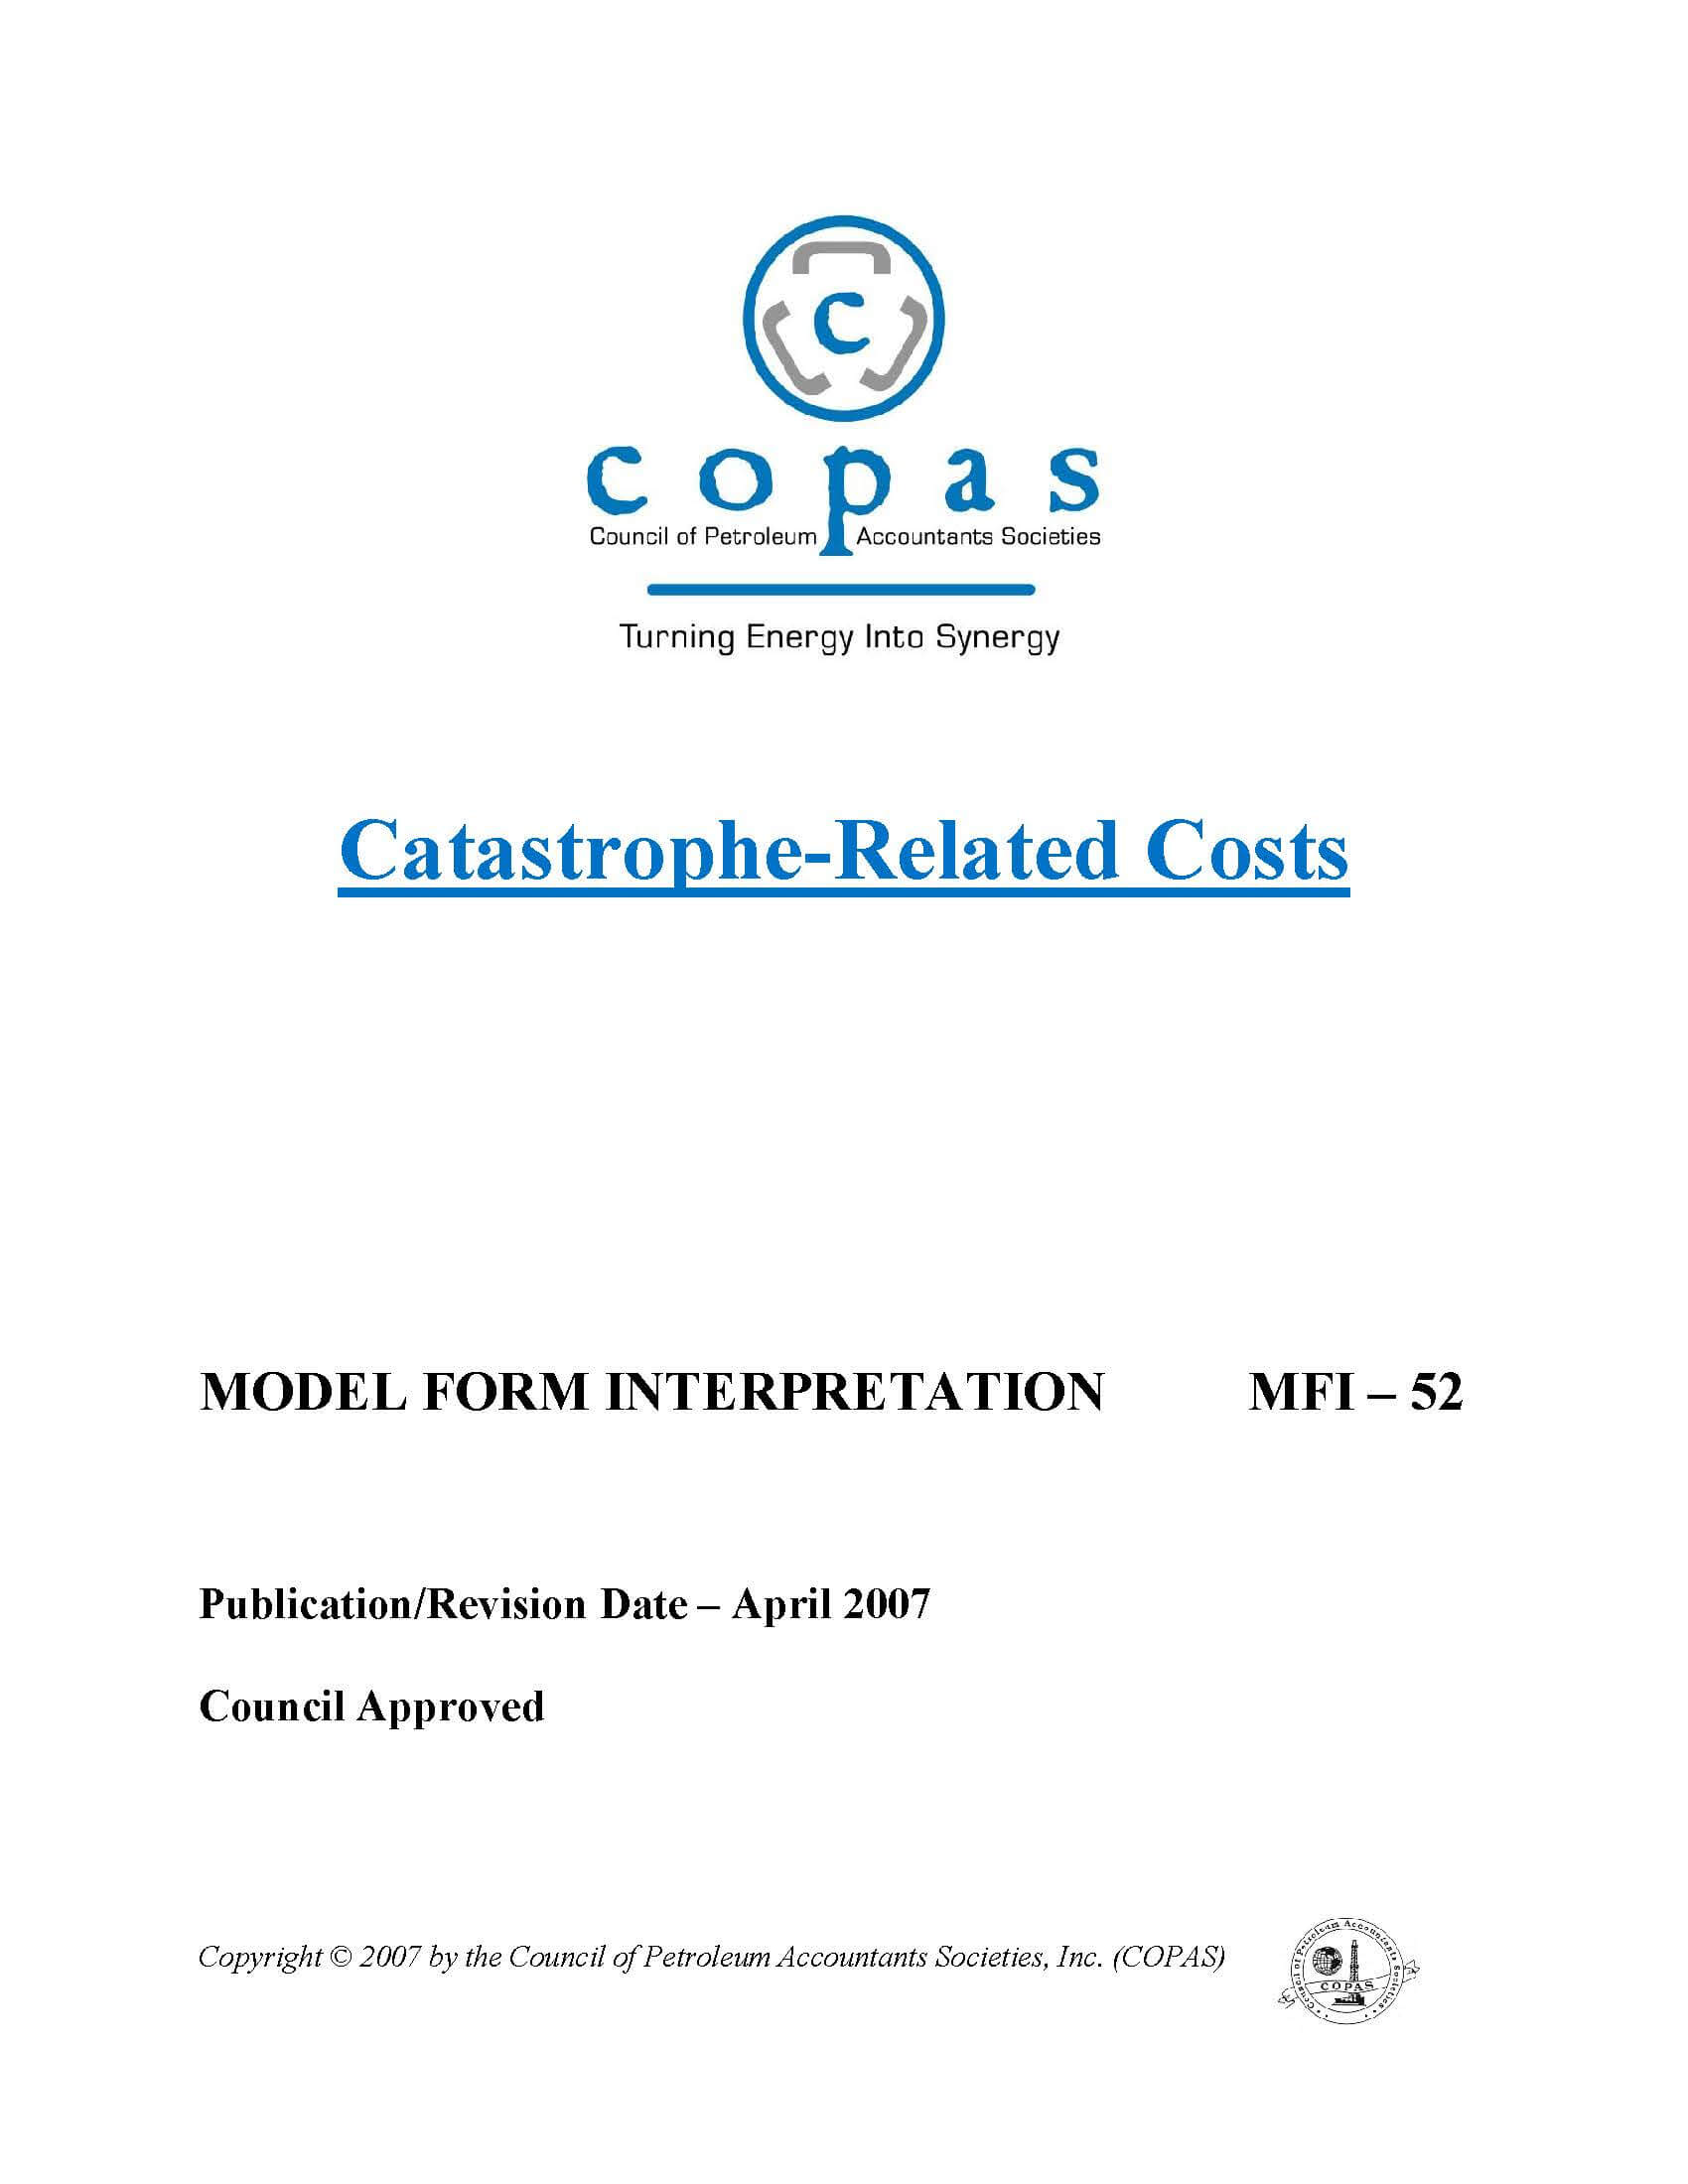 MFI-52 Catastrophe-Related Costs - products MFI 52 Catastrophe Related Costs - Council of Petroleum Accountants Societies